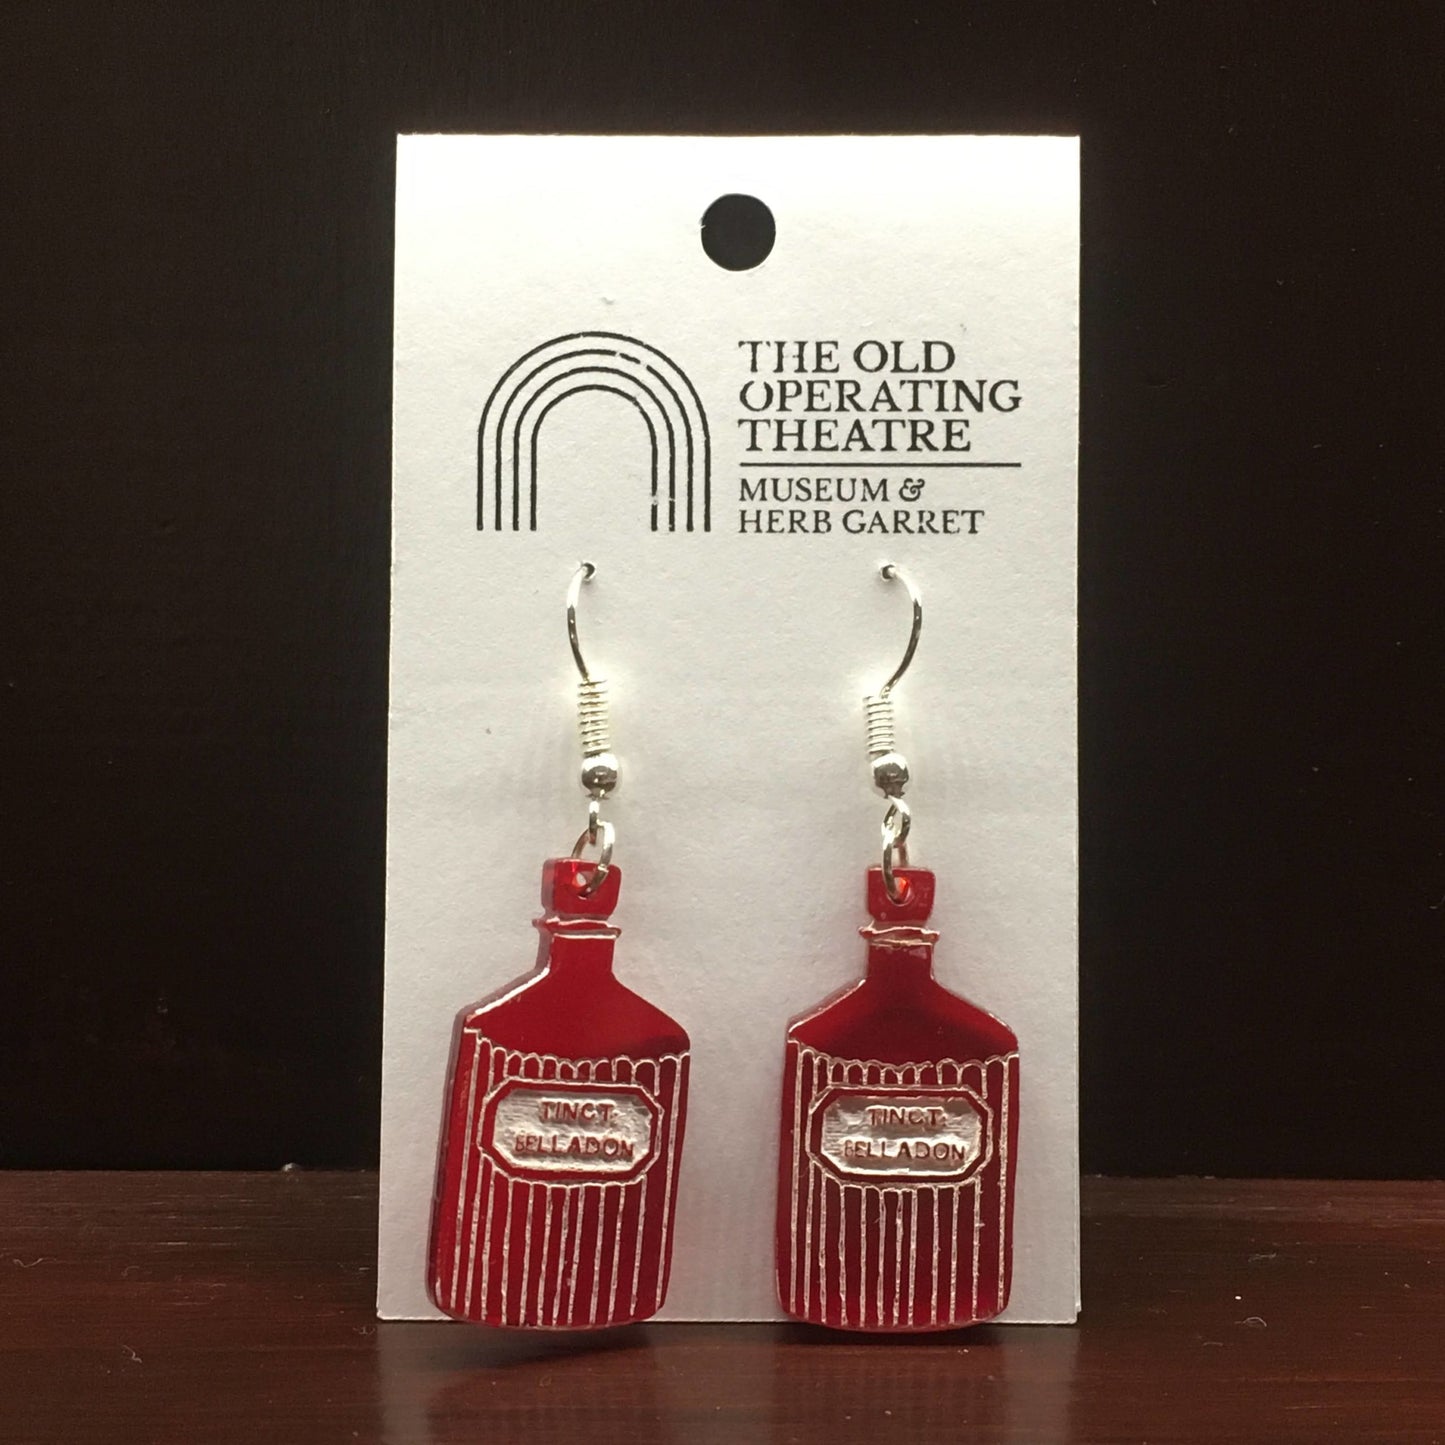 Pair of red dangle earrings in the shape of a bottle with the label 'tinct. belladon'